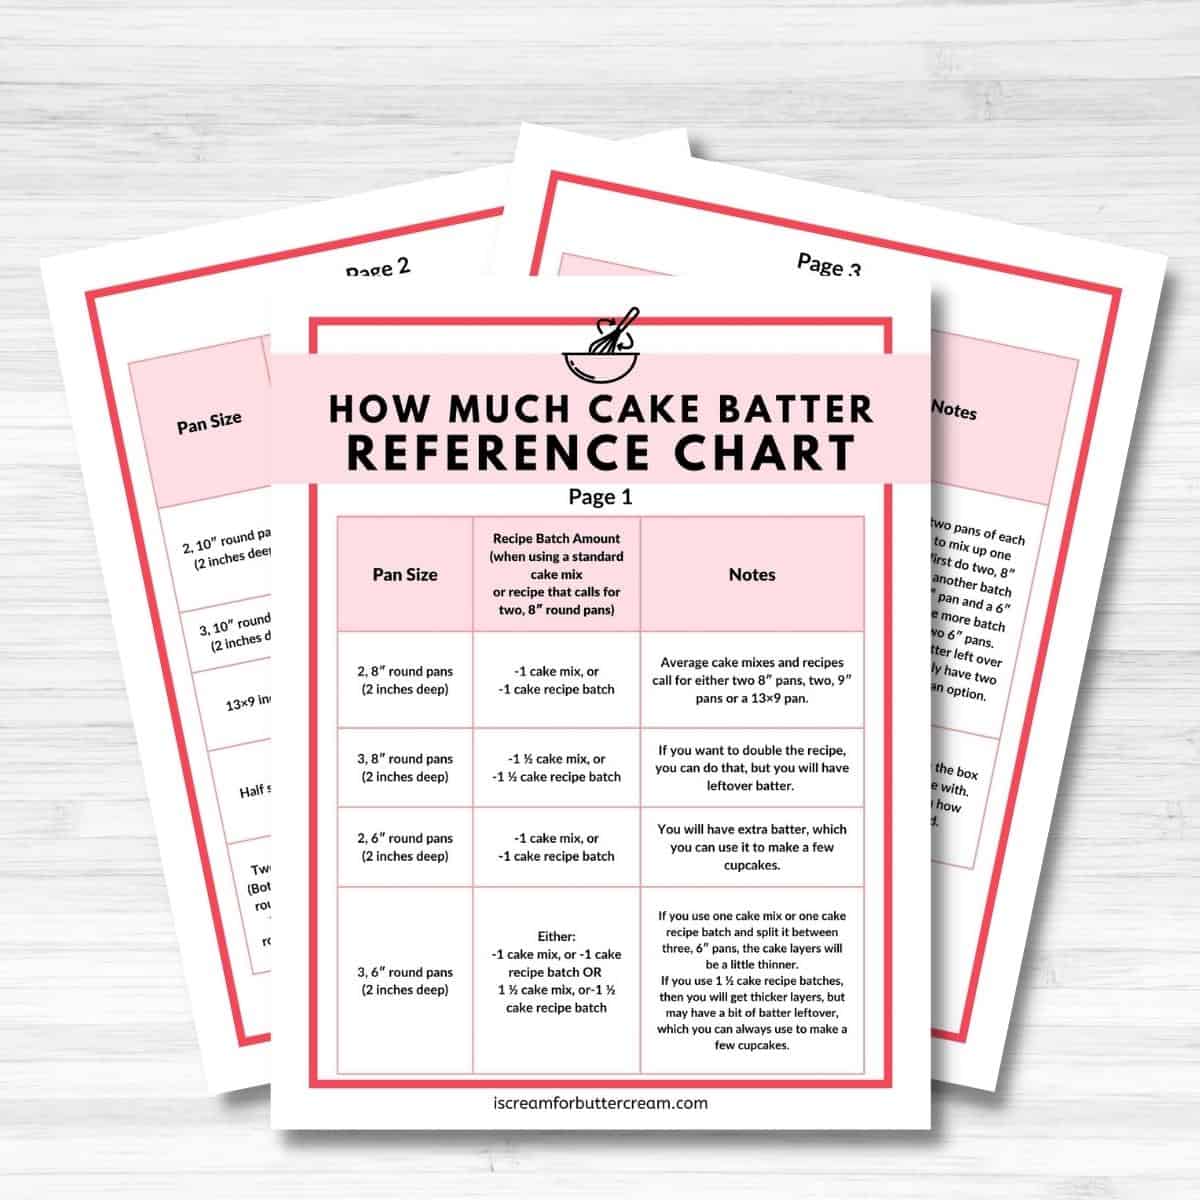 Mockup of cake batter reference chart for library.